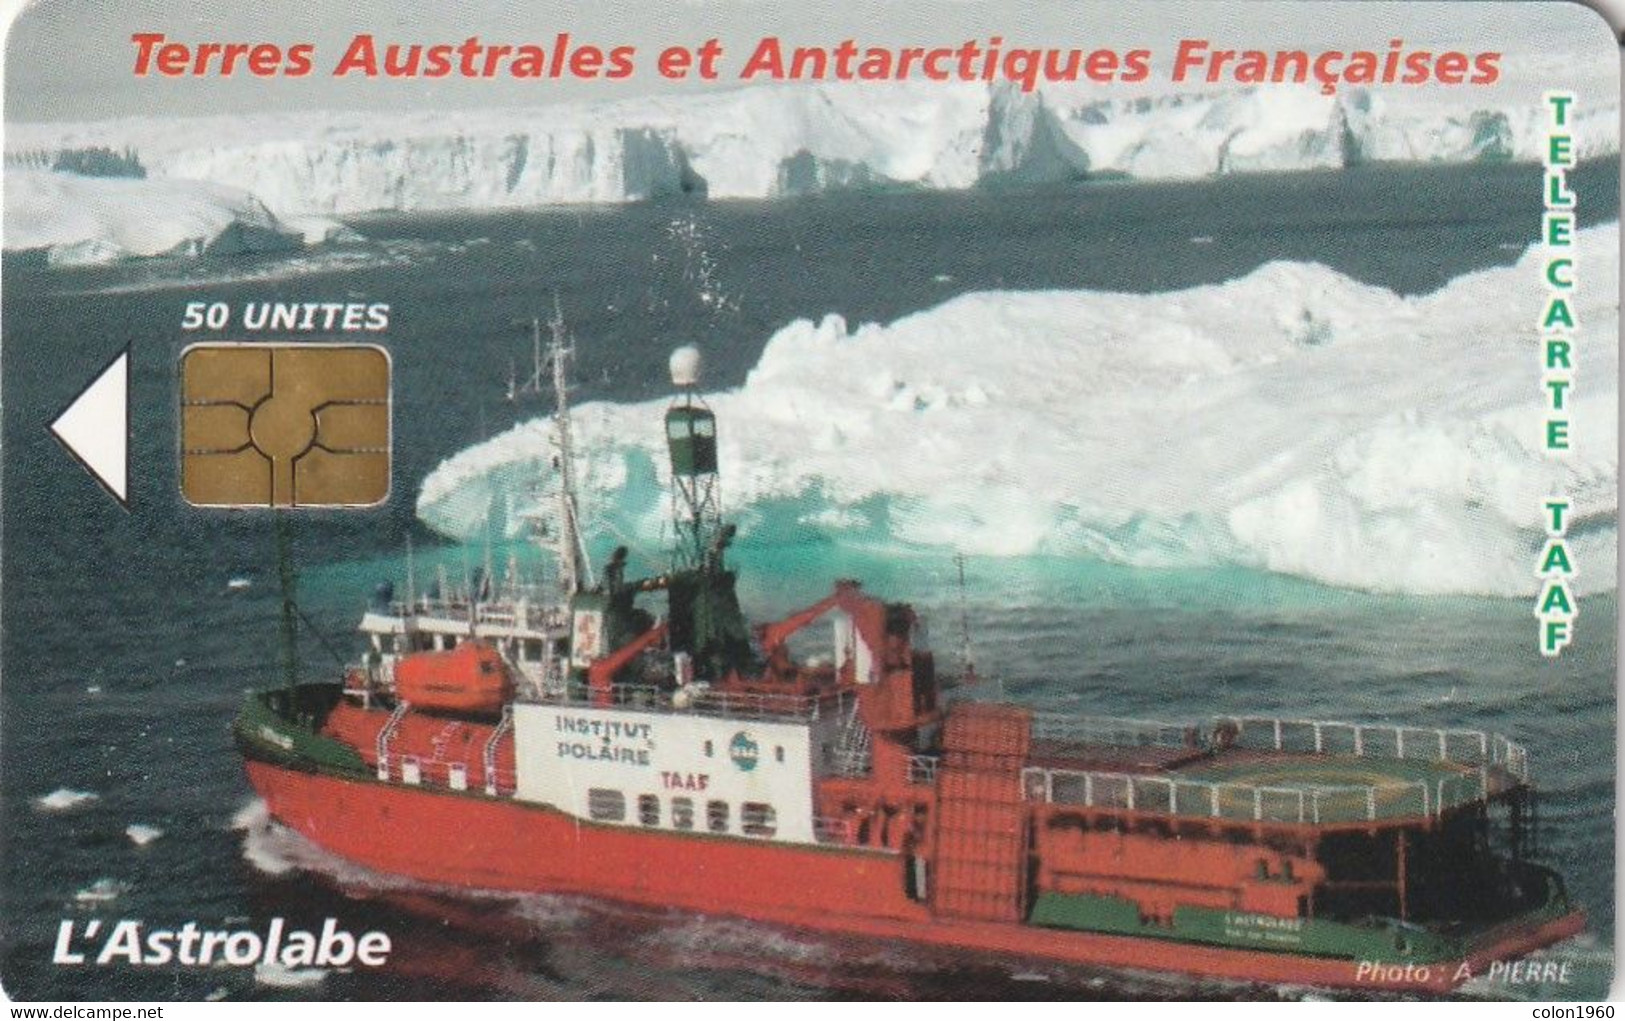 TAAF. TF-STA-0037.  Territorios Australes Antárticas Francesas. L'Astrolabe. 2005-06. 3000ex. (001) - TAAF - French Southern And Antarctic Lands